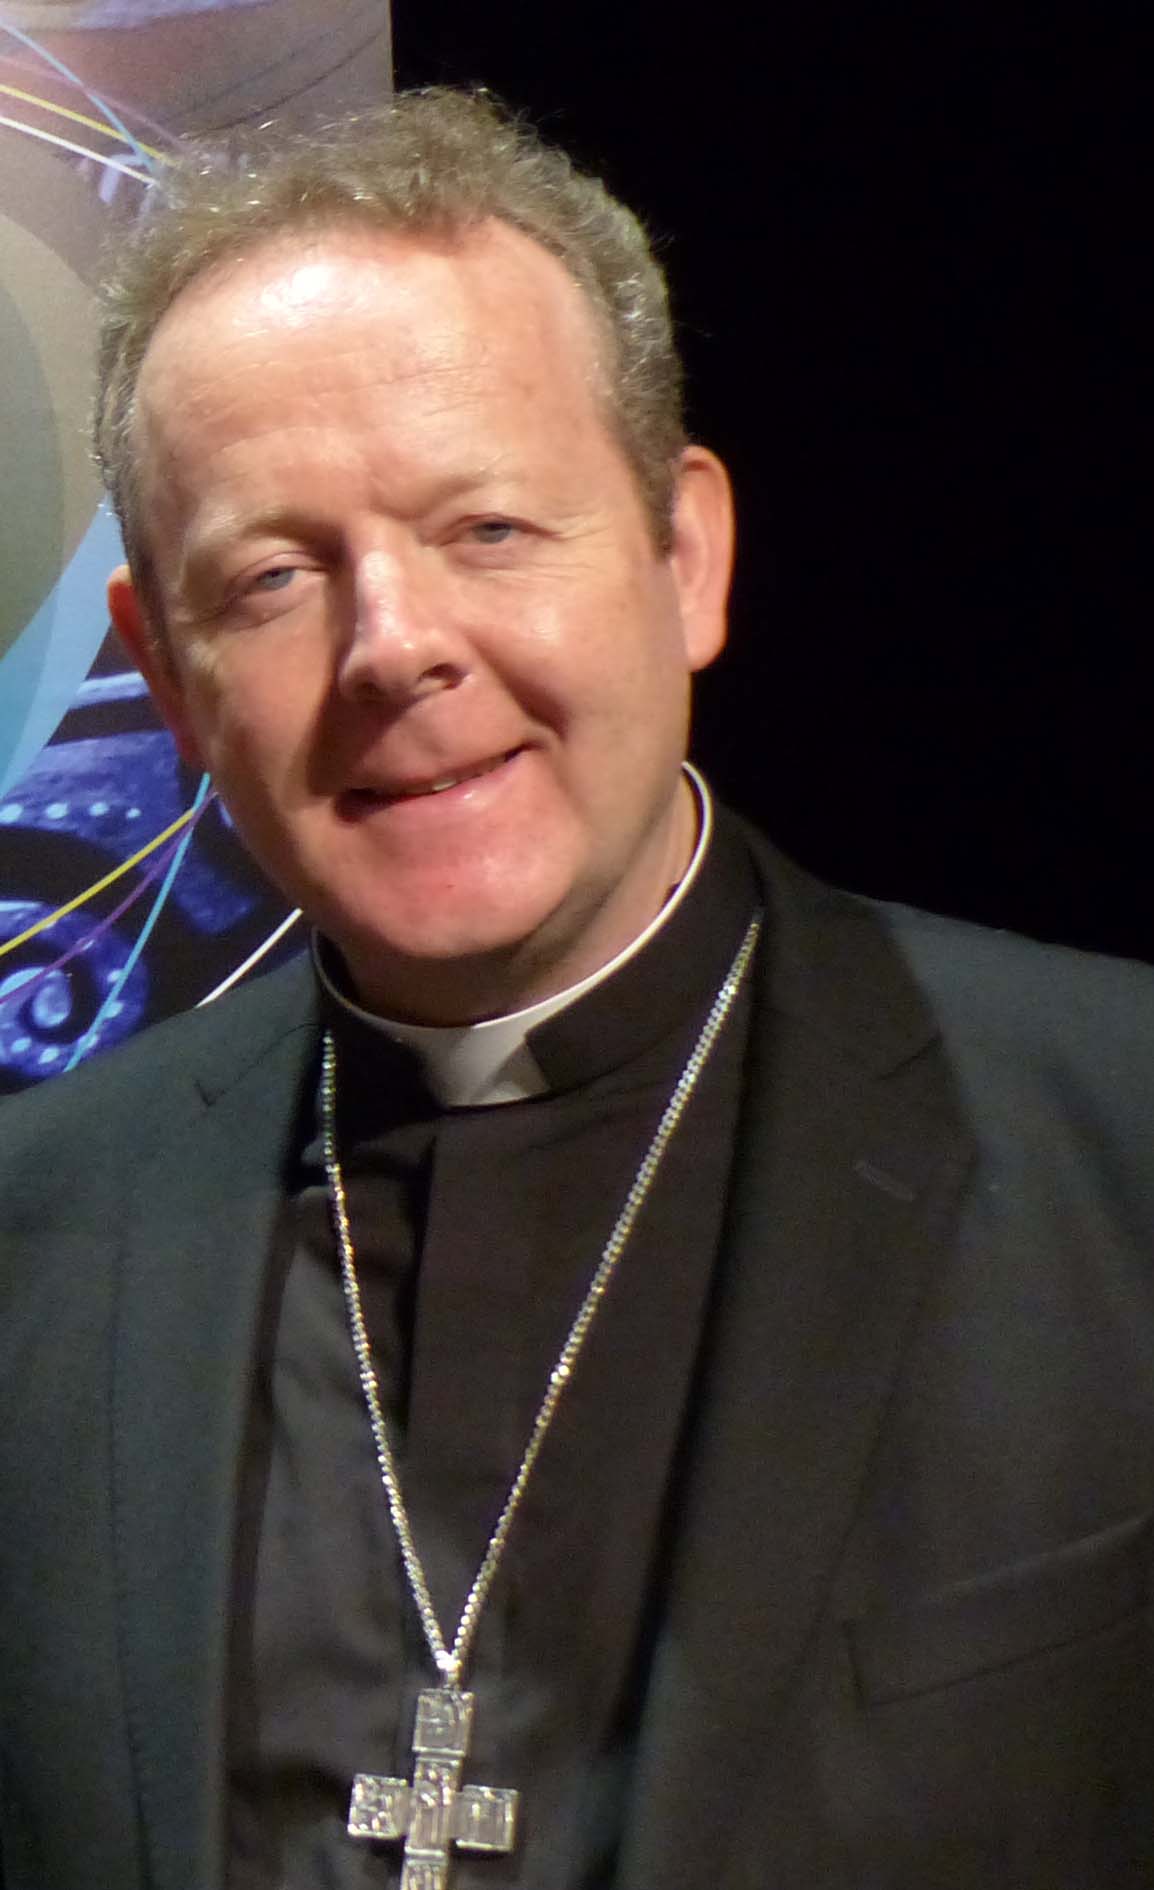 The Most Revd Eamon Martin, Catholic Archbishop of Armagh.